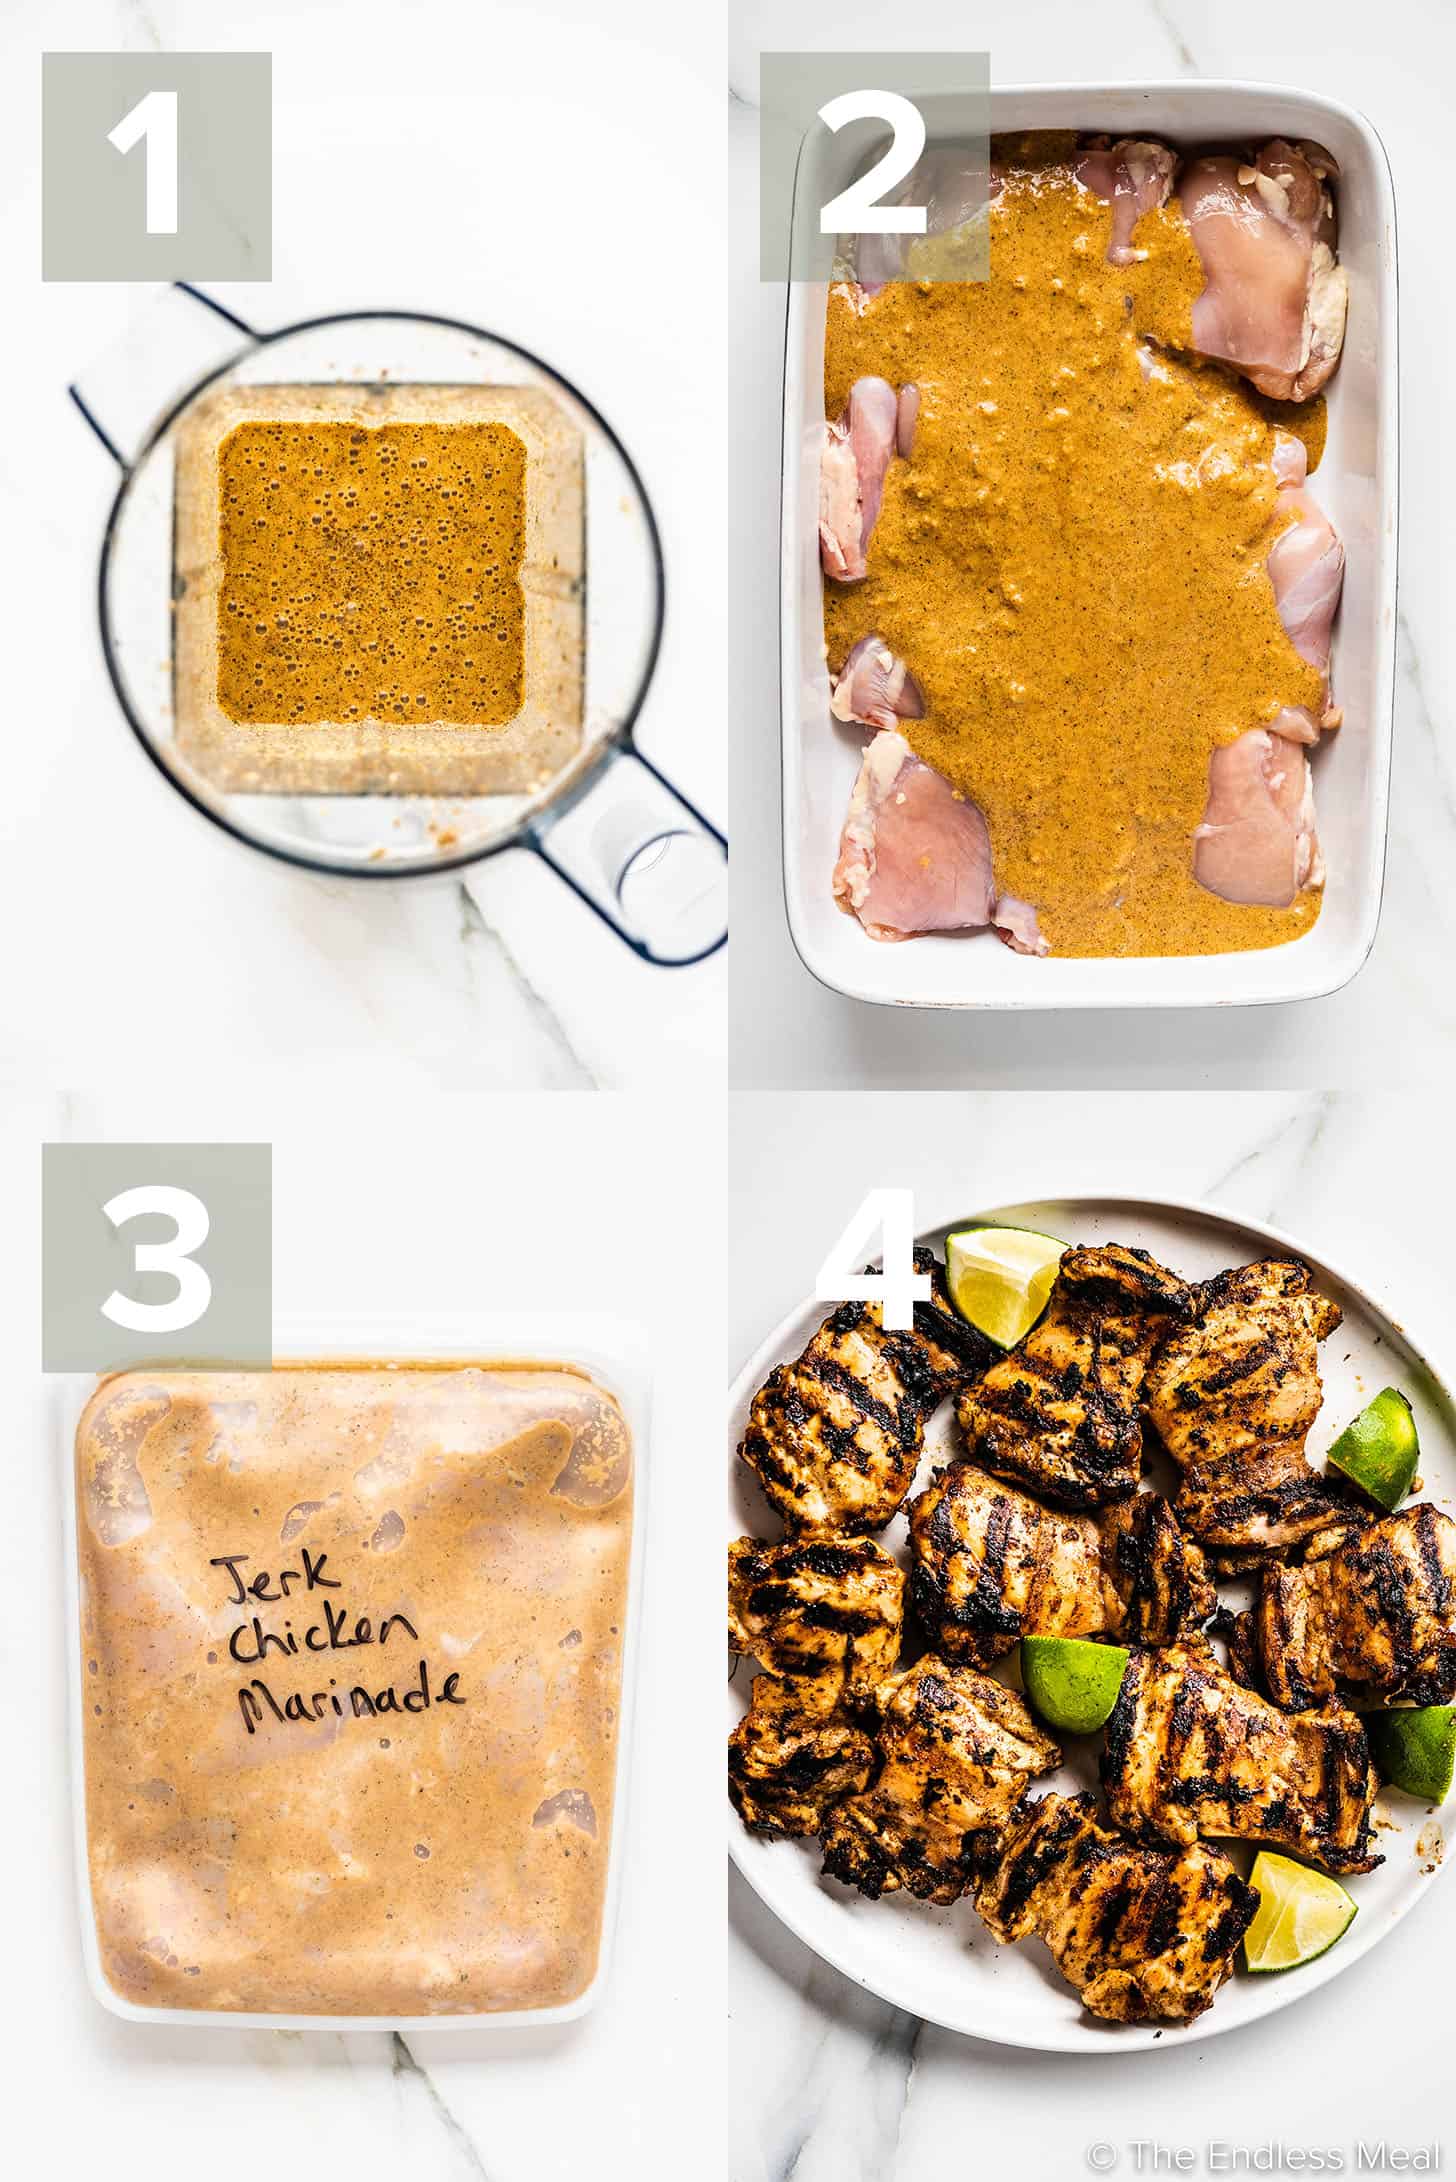 4 pictures showing how to make Jerk Chicken Marinade